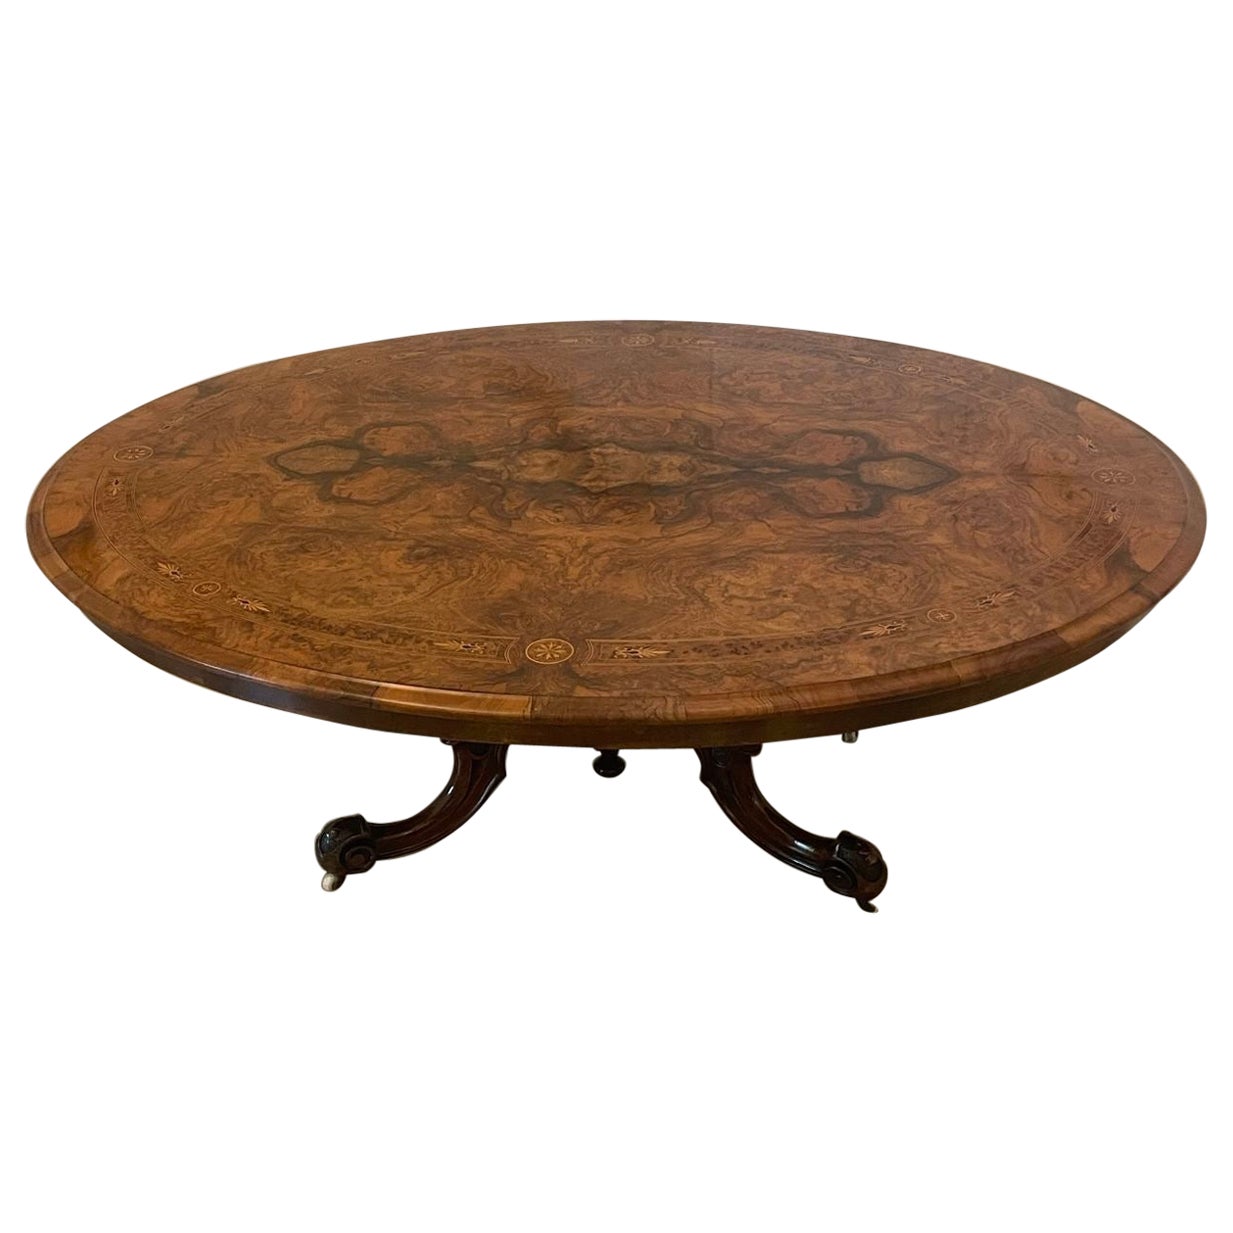 Outstanding Quality Antique Victorian Burr Walnut Inlaid Oval Coffee Table  For Sale